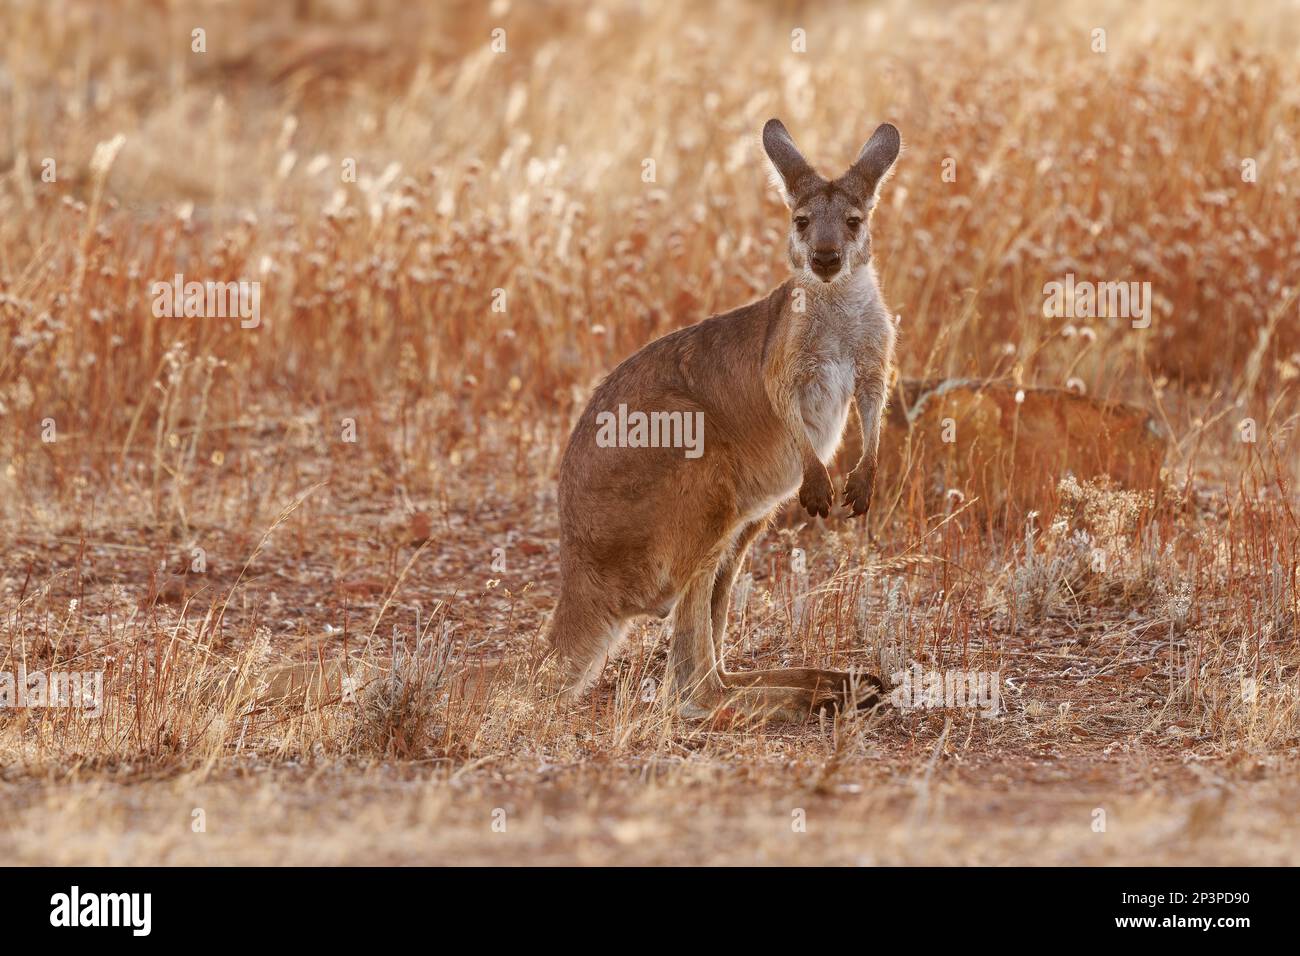 Common Wallaroo - Osphranter robustus also called euro or hill wallaroo, mostly nocturnal and solitary, loud hissing noise, sexually dimorphic, like m Stock Photo